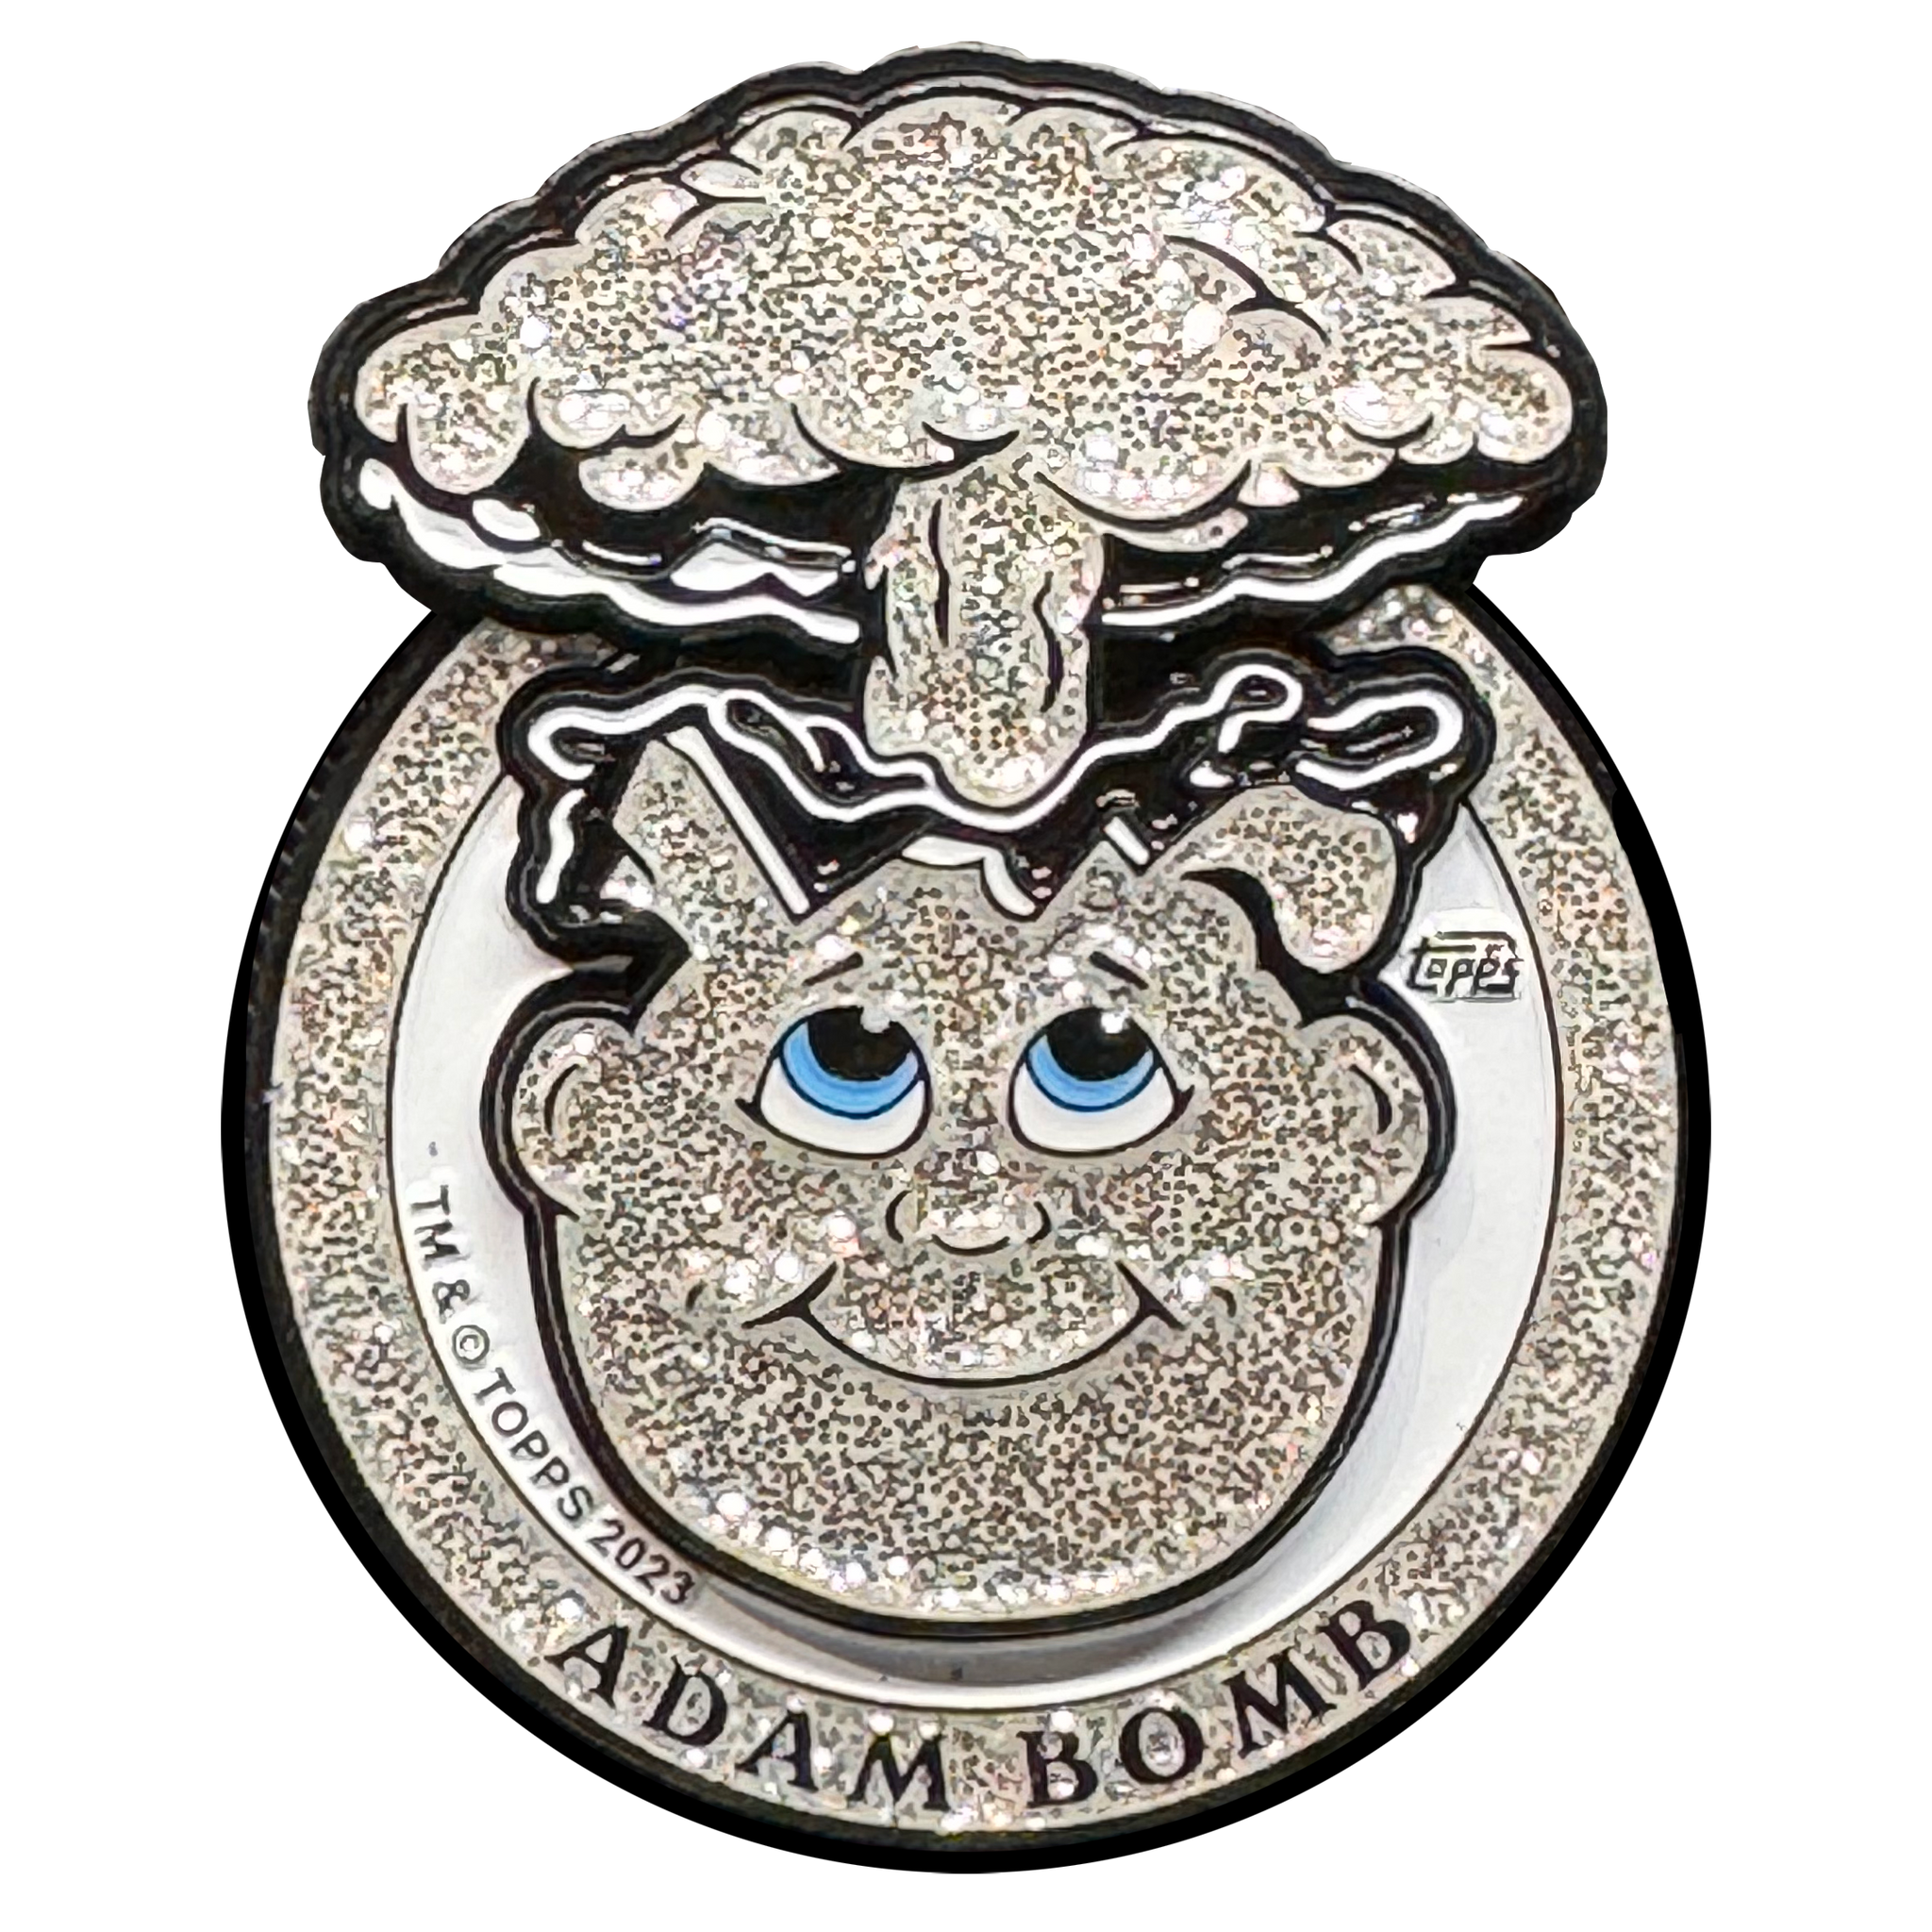 Silver Glitter plated 3-piece Adam Bomb Challenge Coin limited to 15 pieces with individual serial number